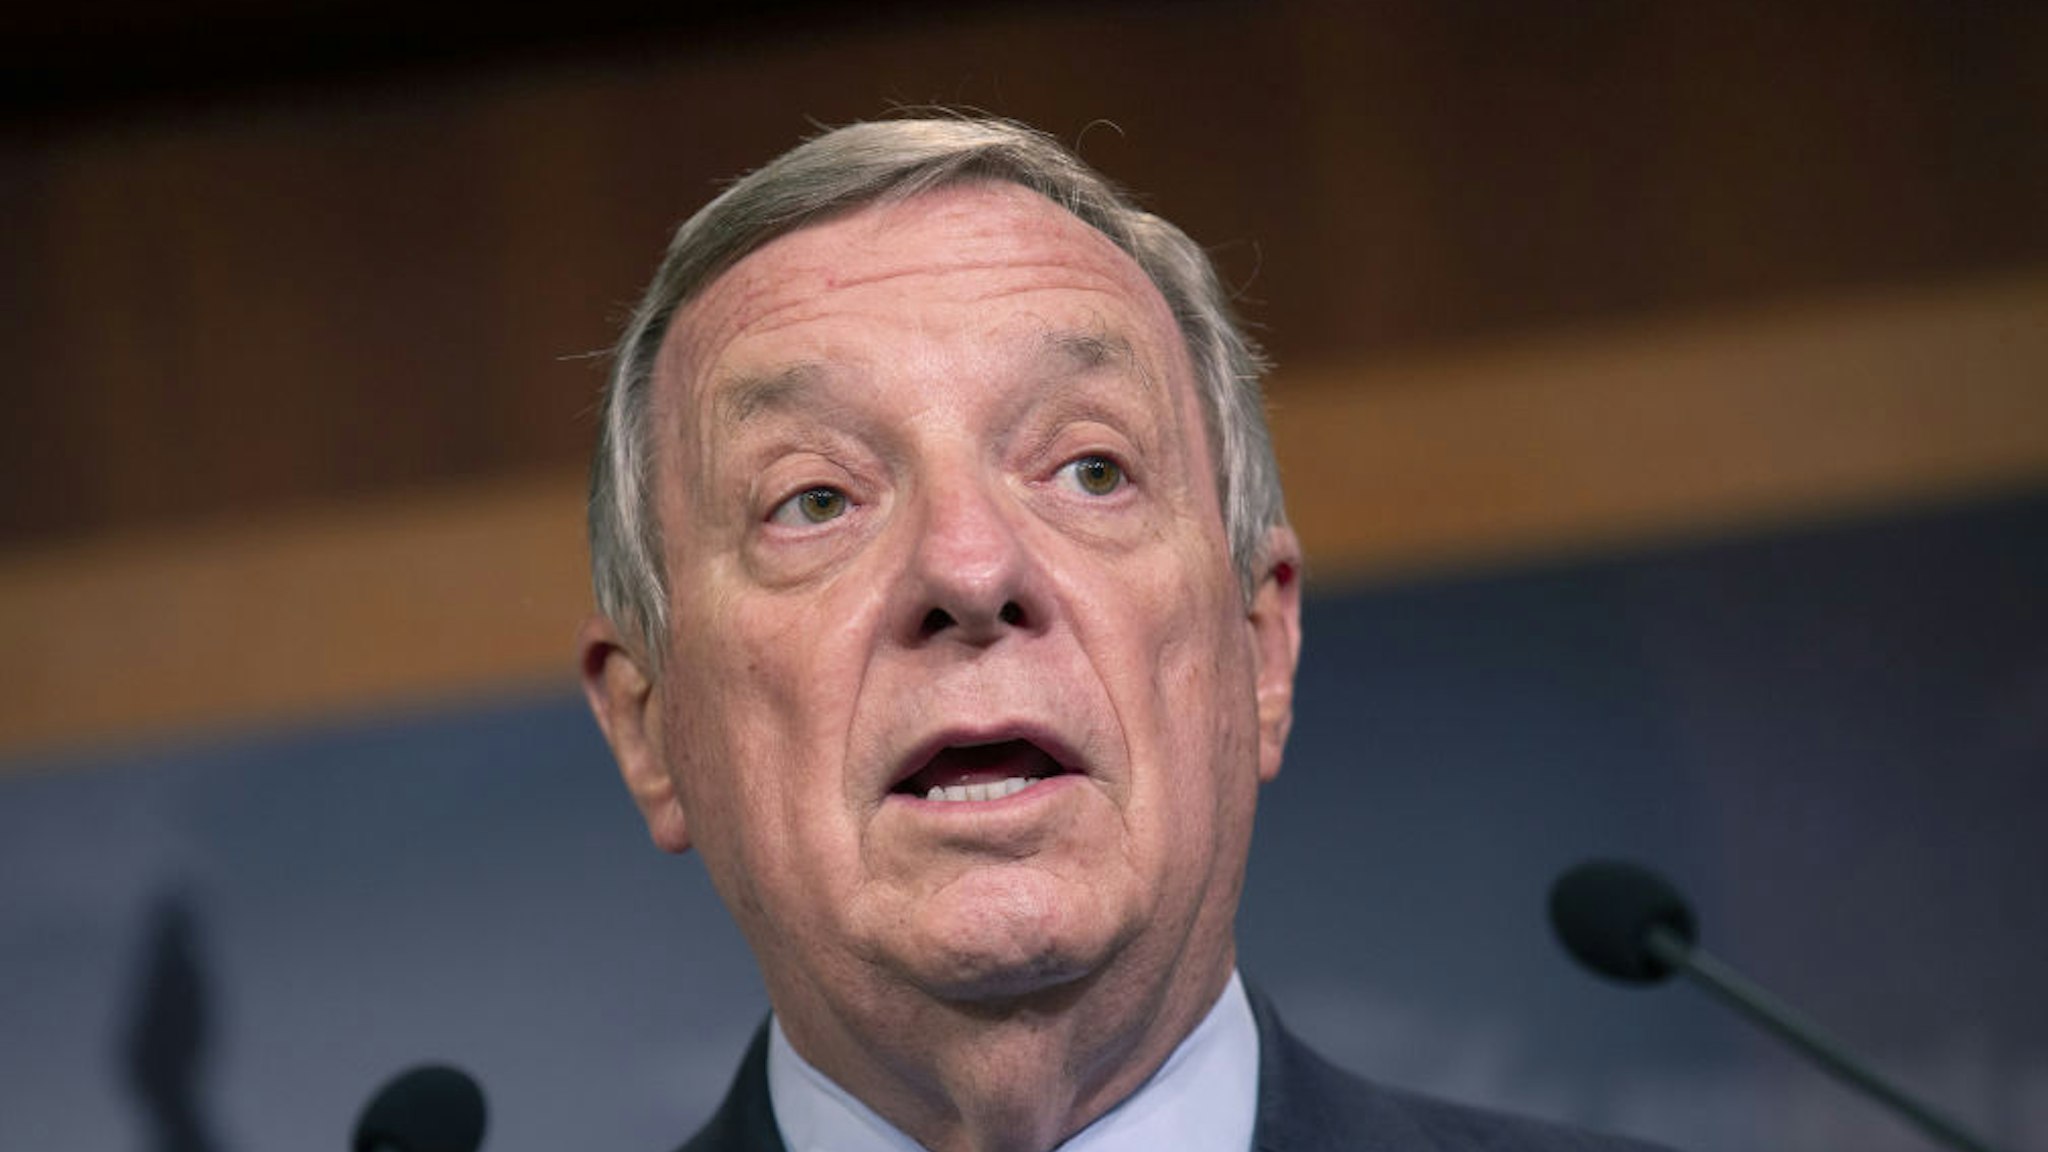 U.S. Senator Dick Durbin, a Democrat from Illinois, speaks during a news conference on Capitol Hill in Washington, D.C., U.S., on Tuesday, July 21, 2020. The White House and Congress have only a few weeks to come up with another stimulus to prevent the economic rout caused by the coronavirus from deepening as the outbreak is surging across the country.